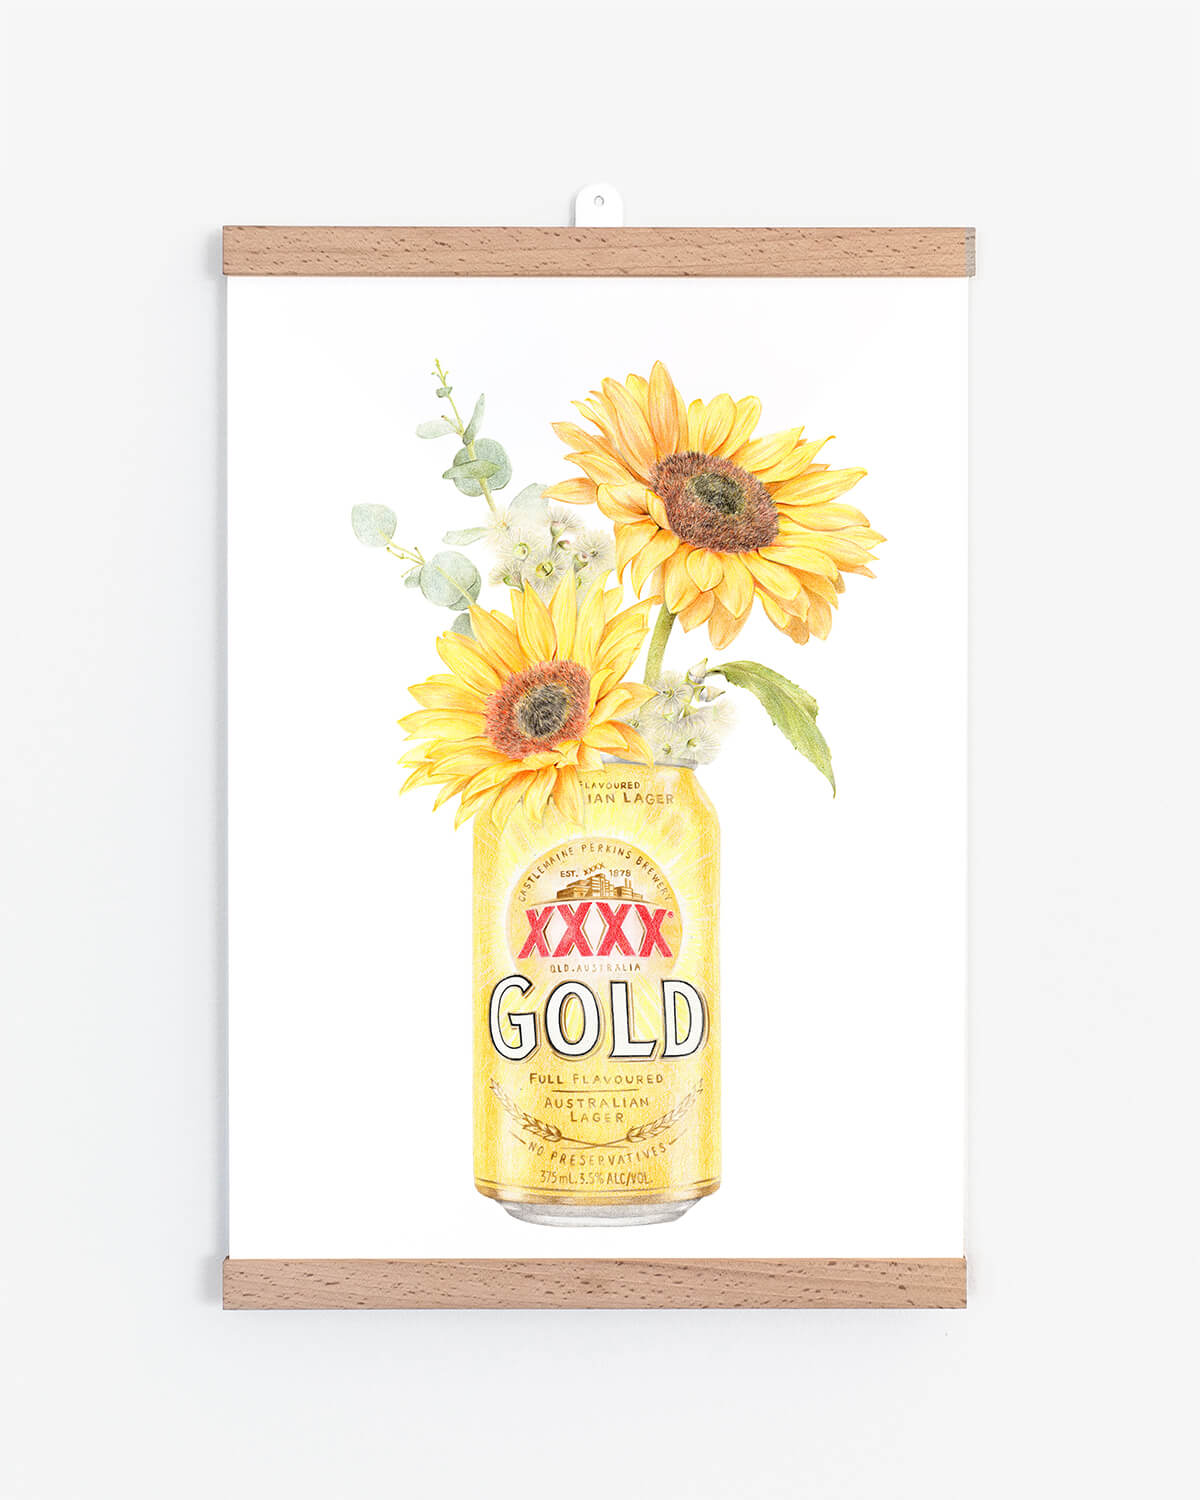 Classic Aussie Beer and Sunflowers Art Print